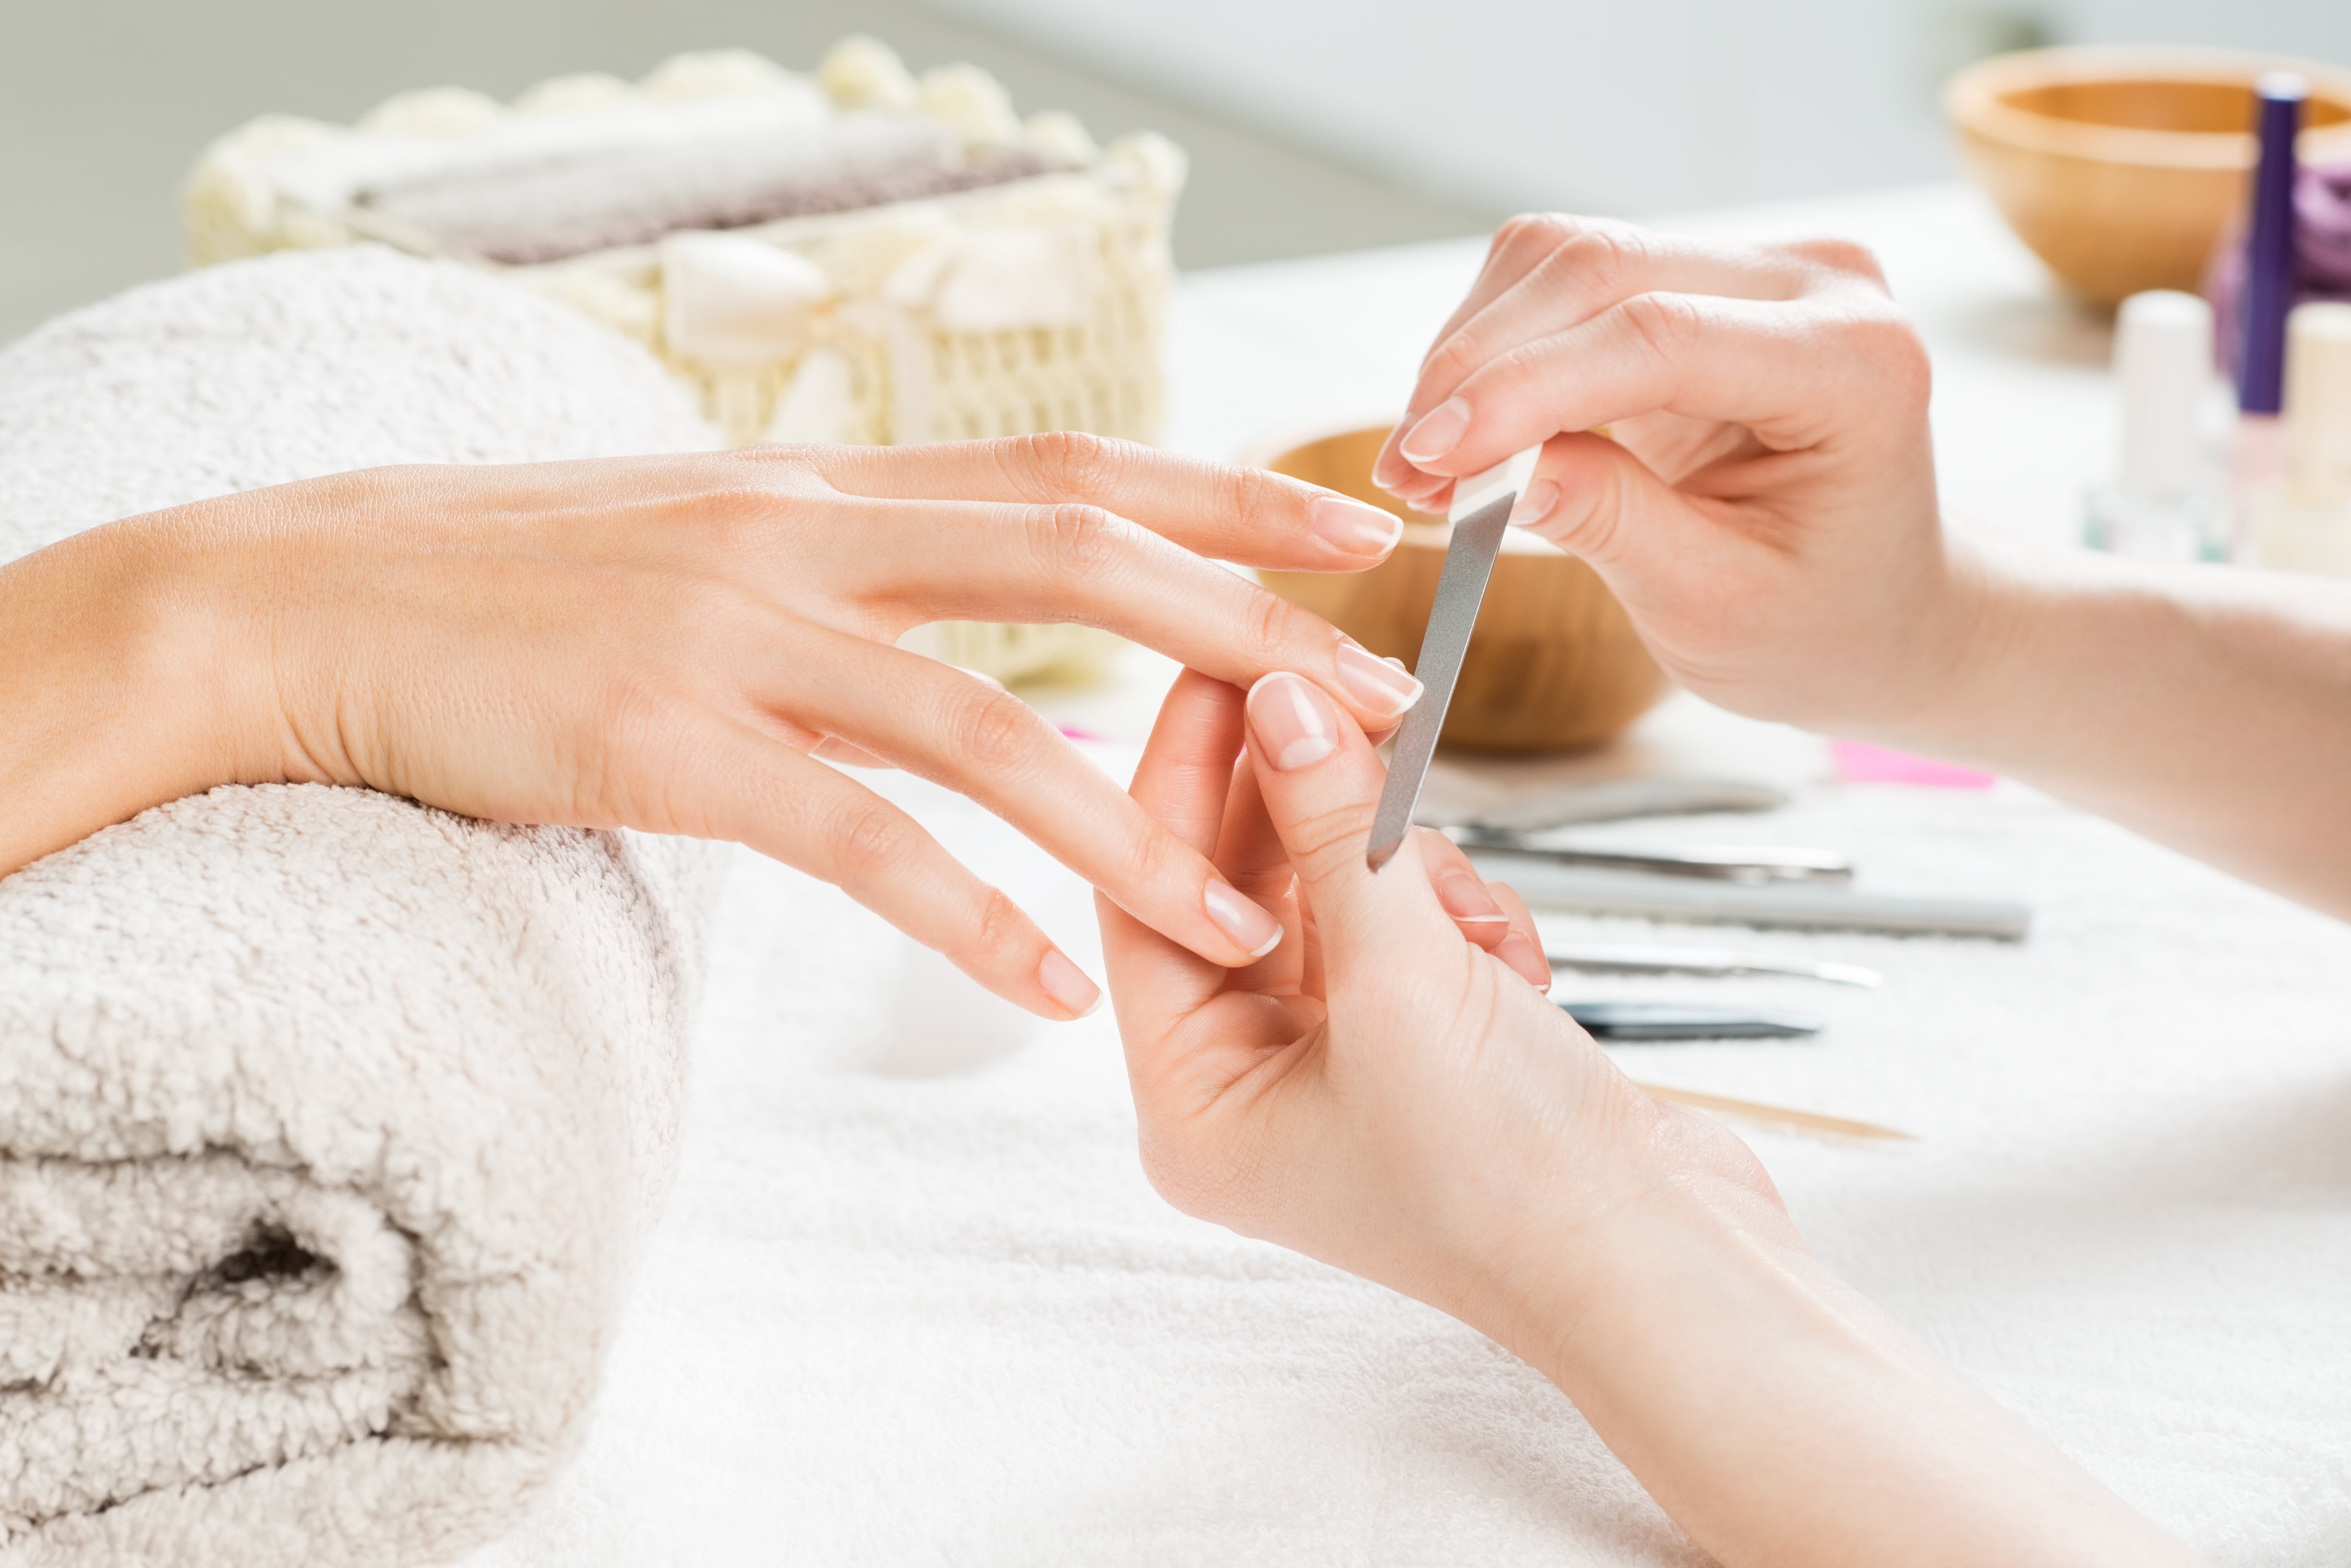 ThuLan Nail Retreat: Read Reviews and Book Classes on ClassPass